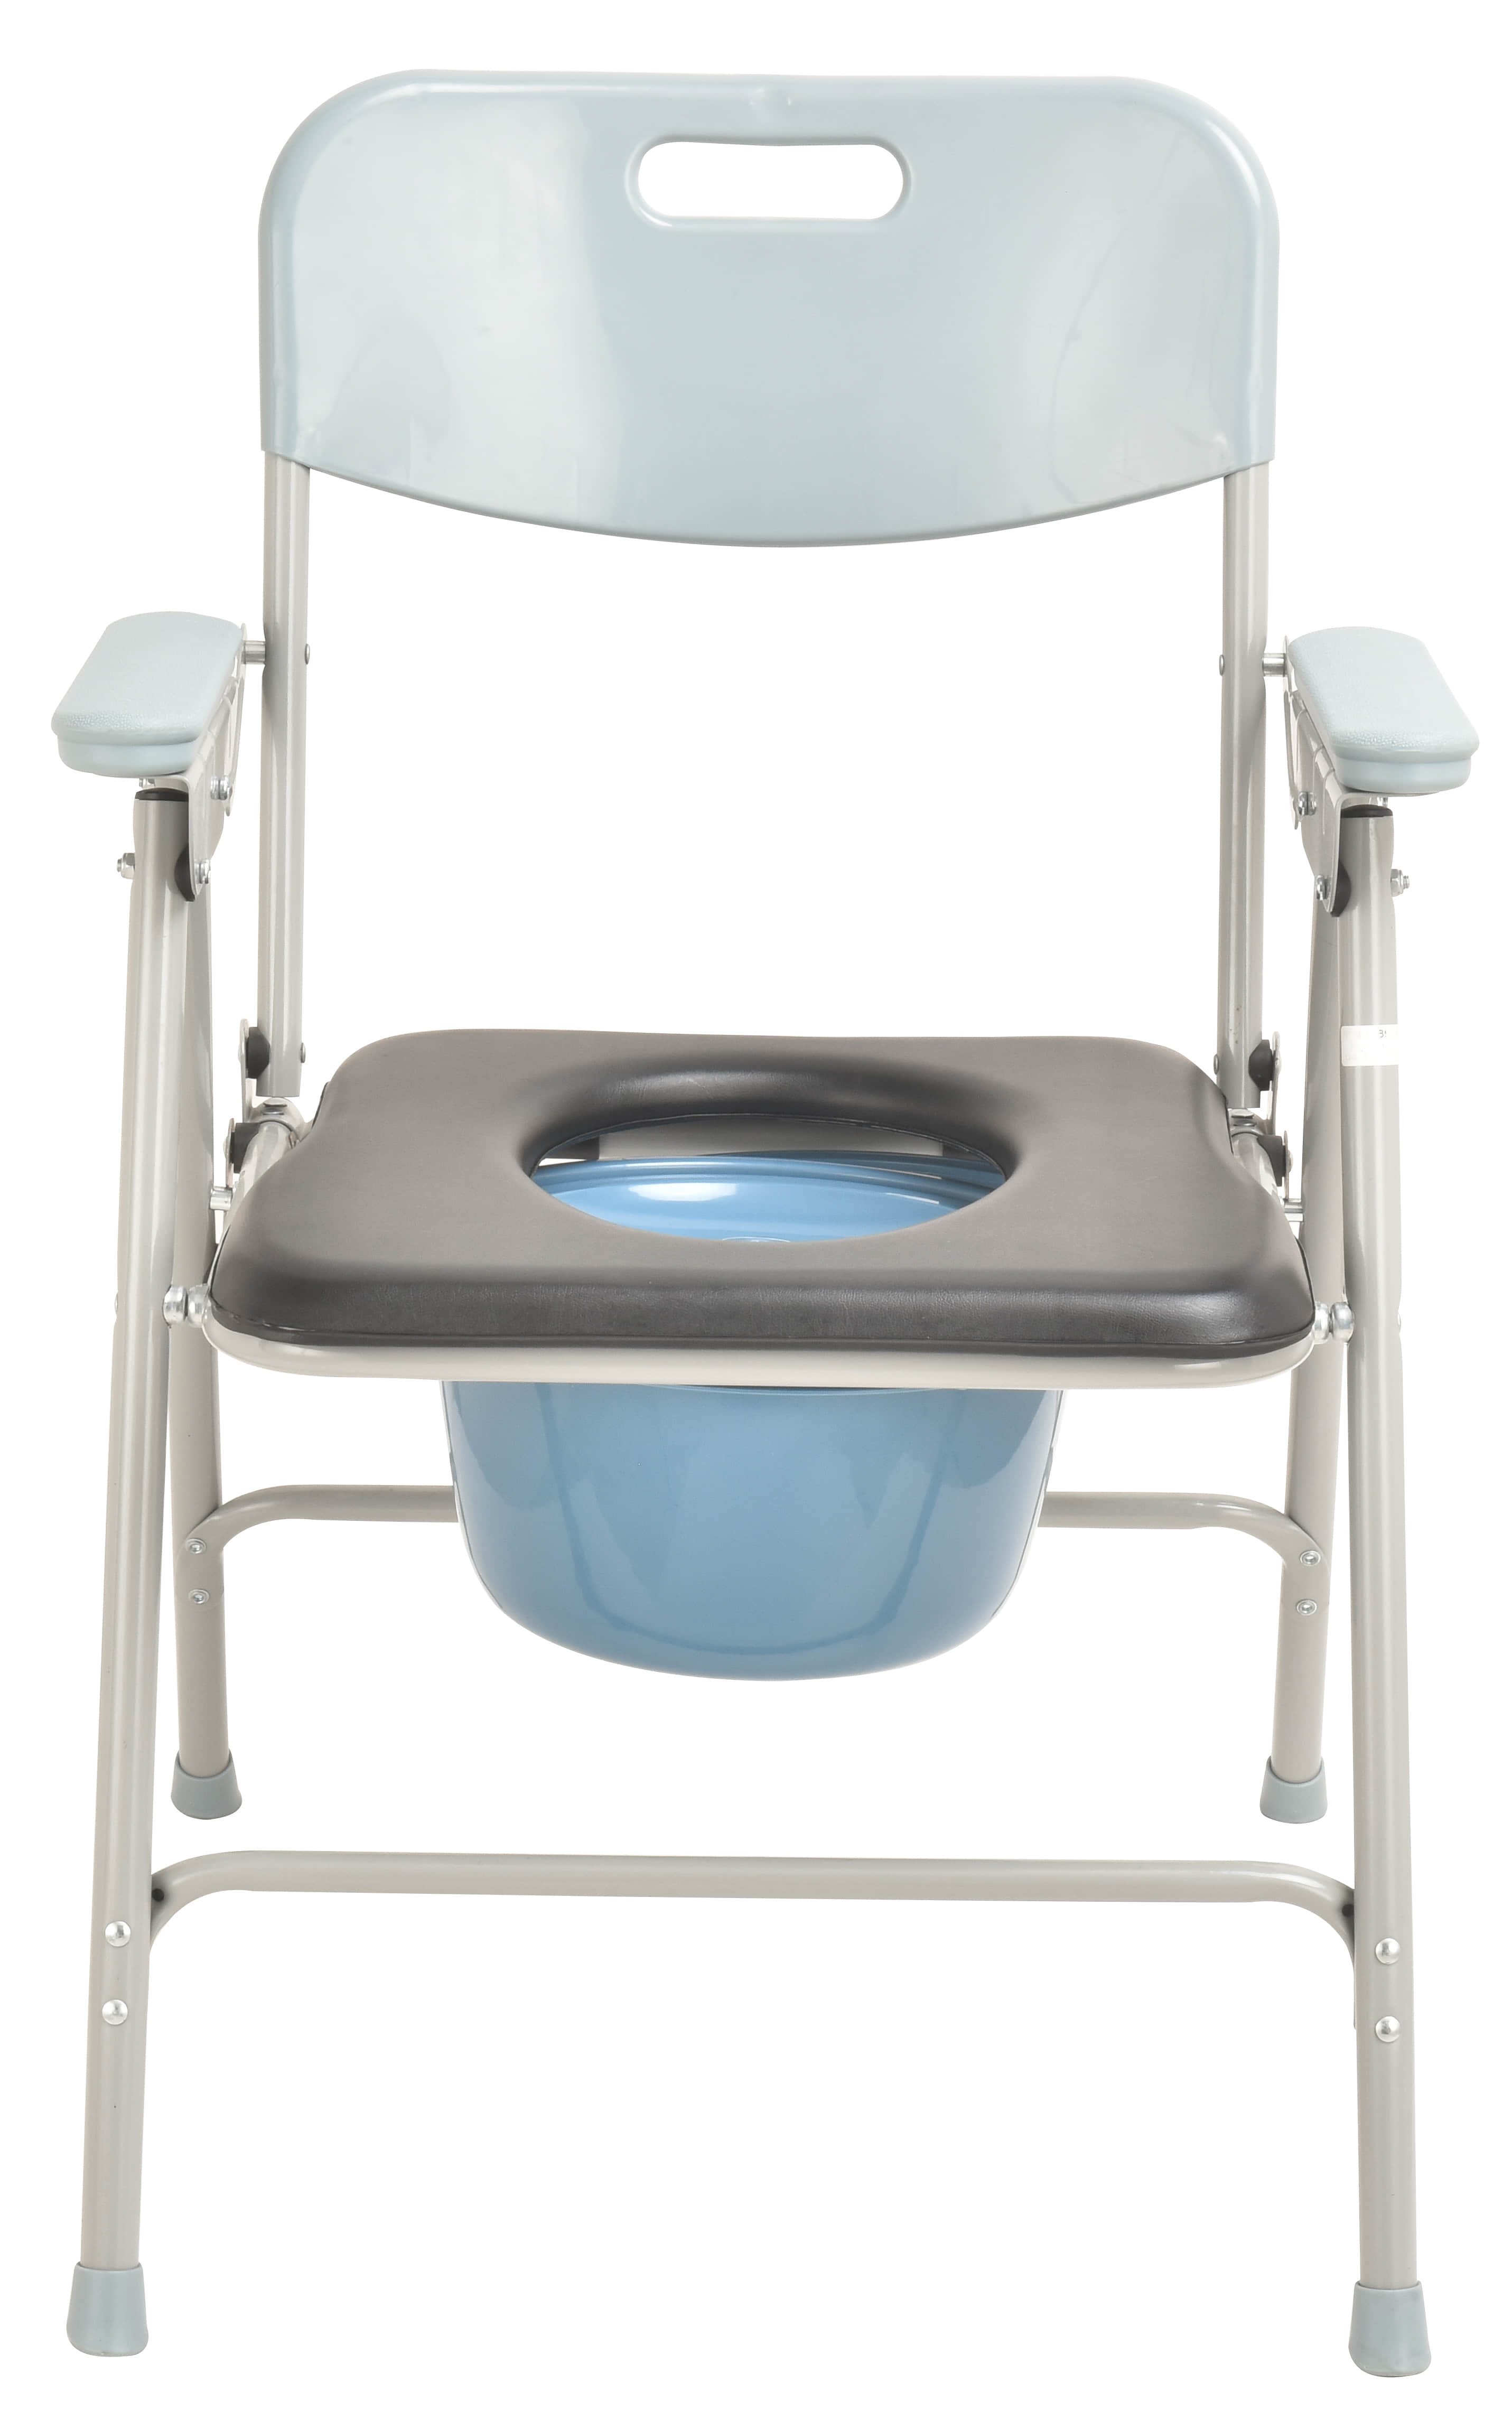 Foldable commode